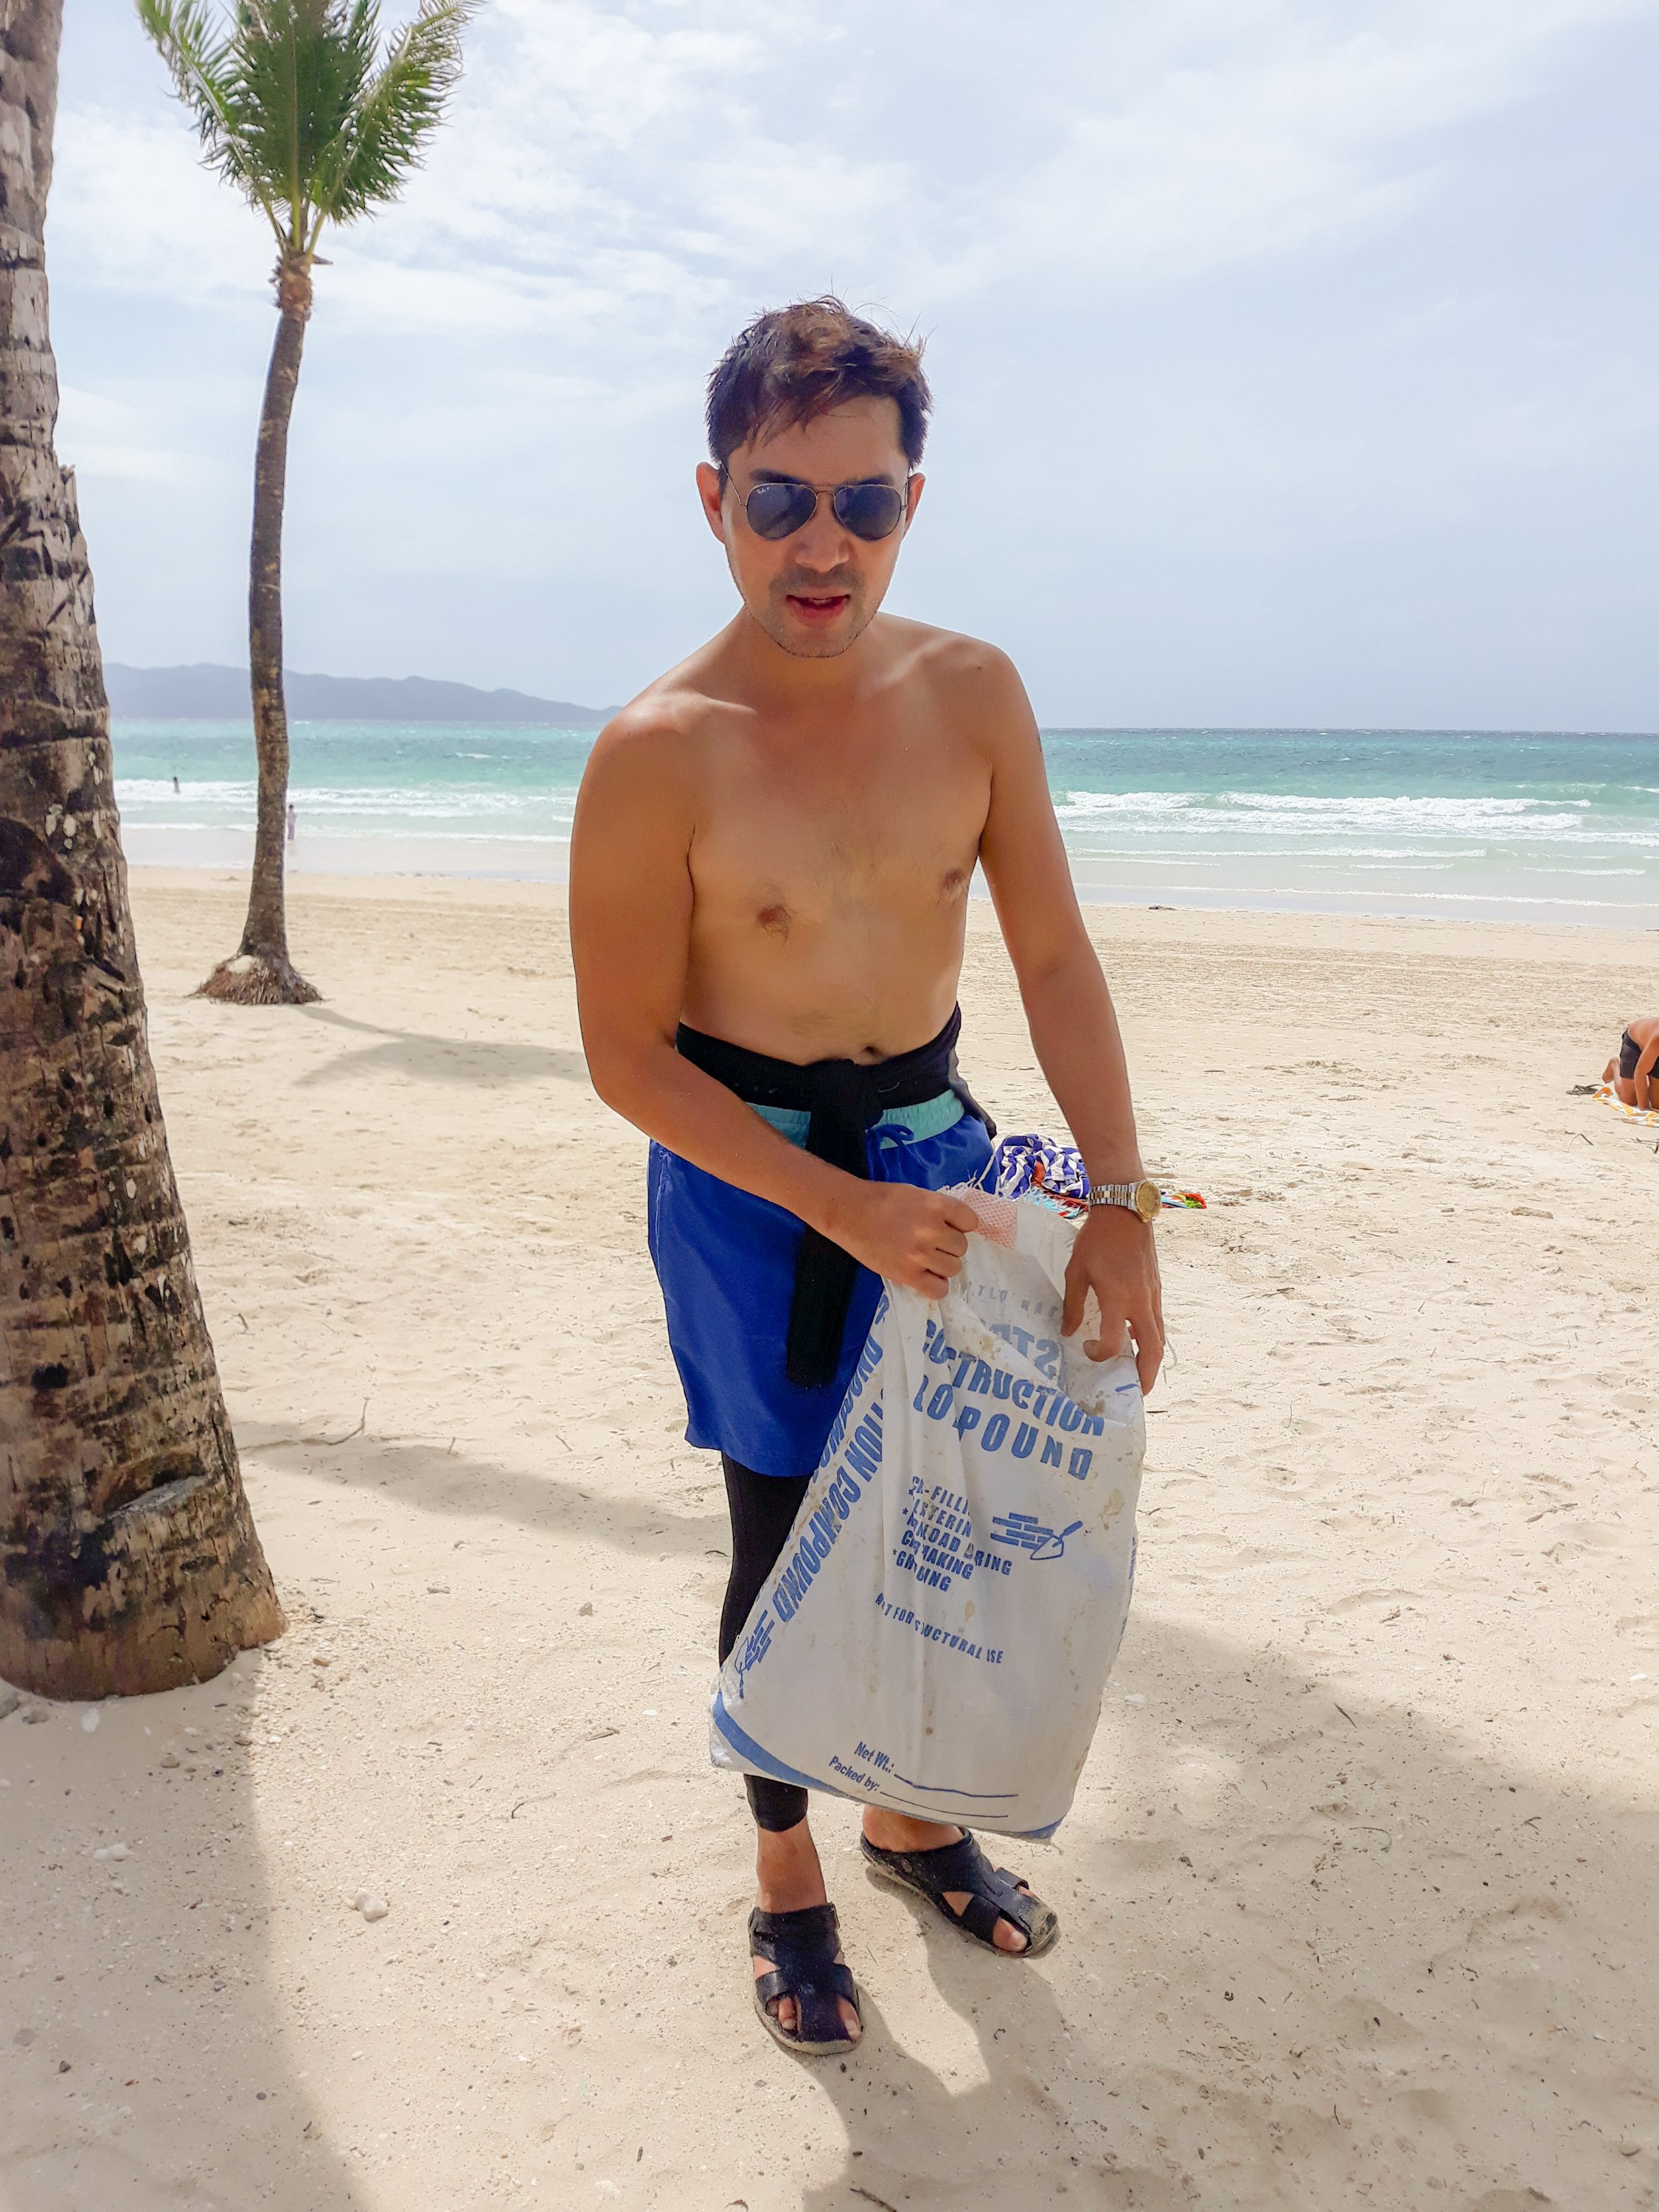 Boracay finally reopens for tourism after six months of rehabilitation